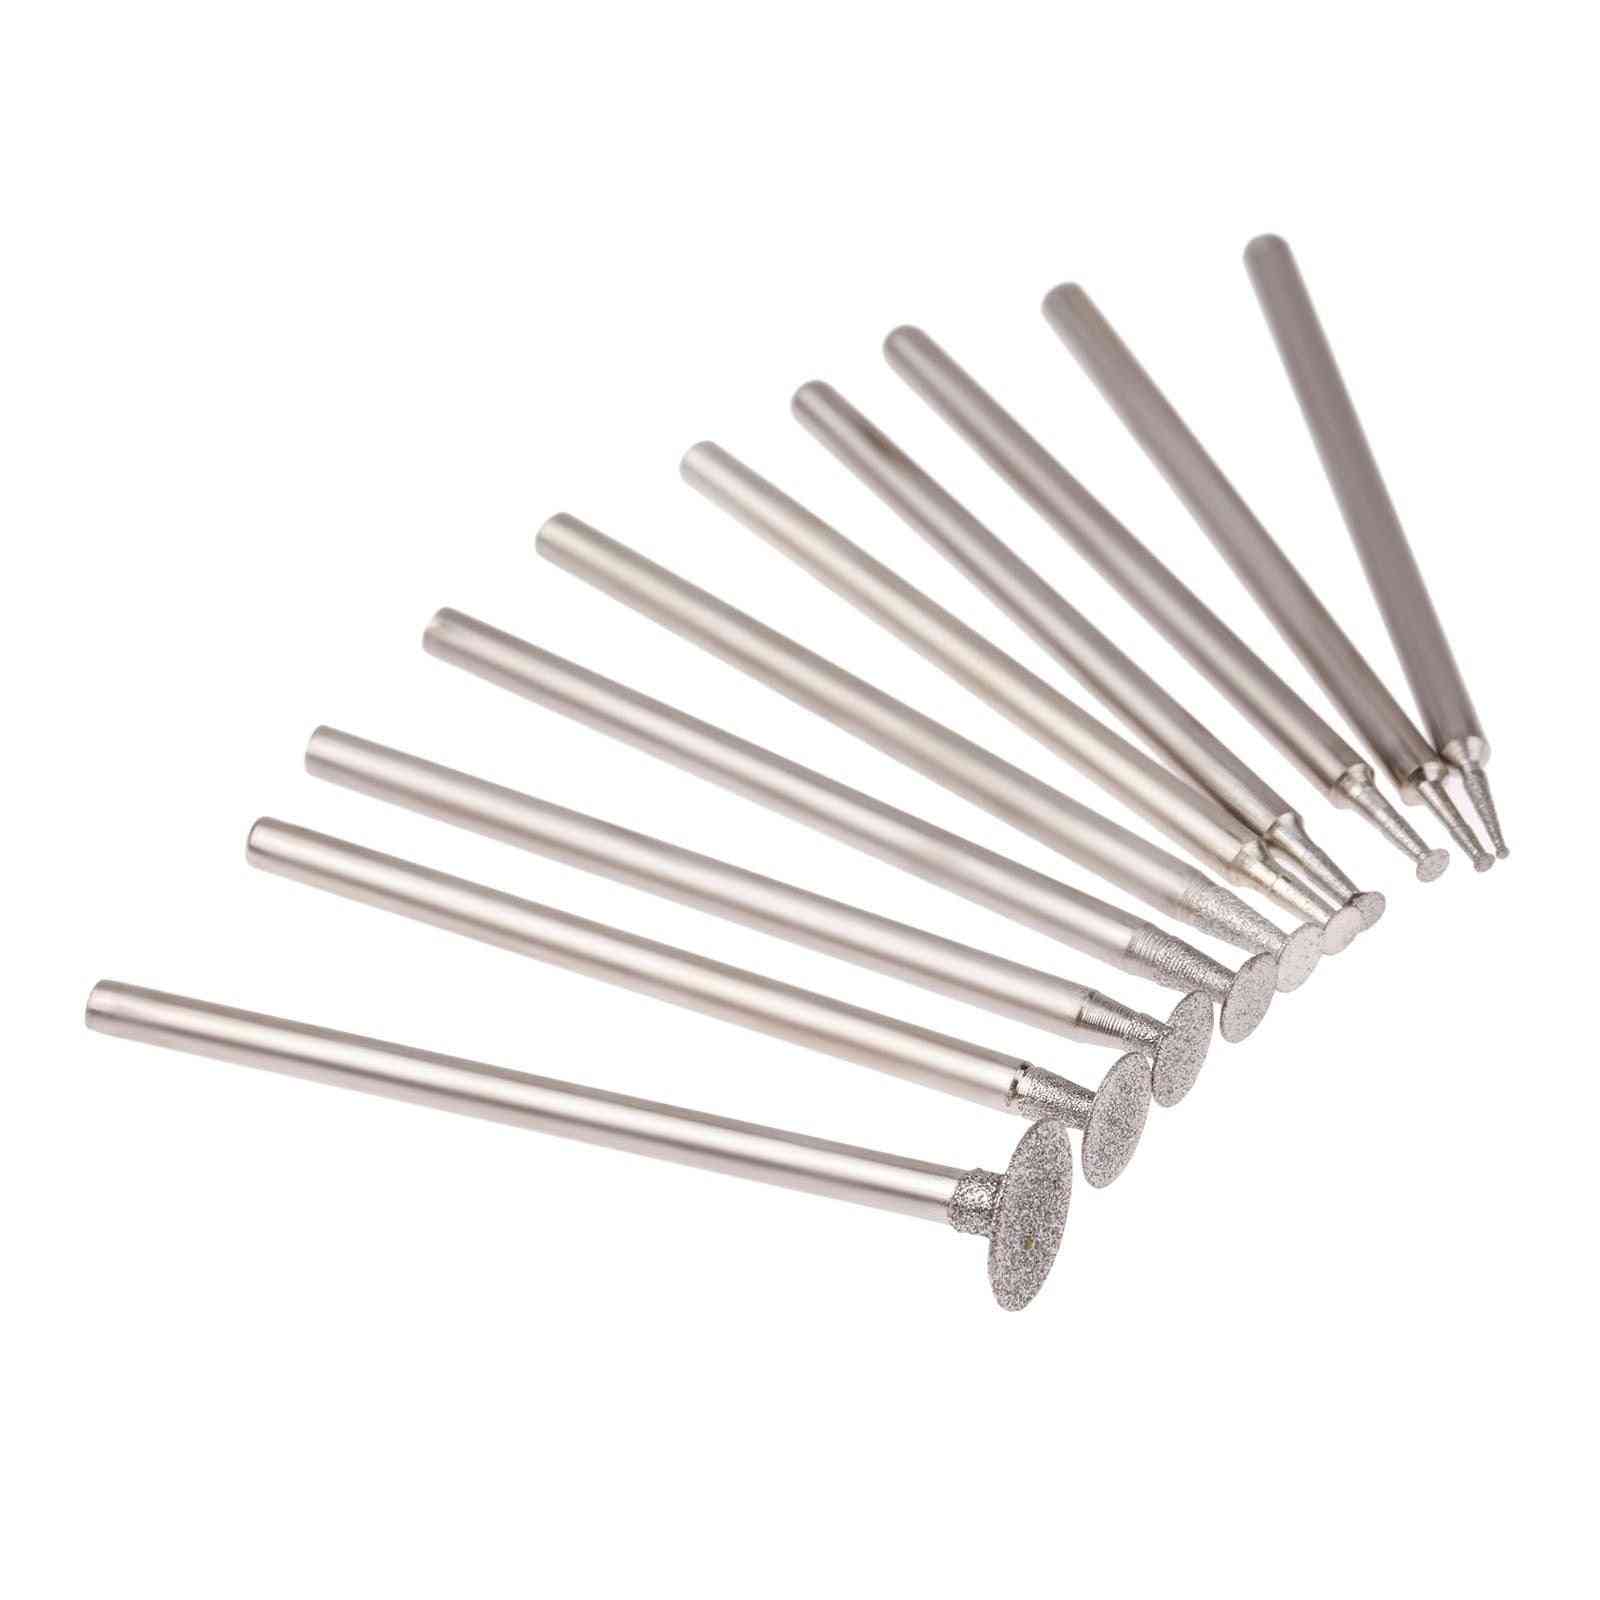 Shank Diamond Mounted Point, Grinding Head Engraving Tools